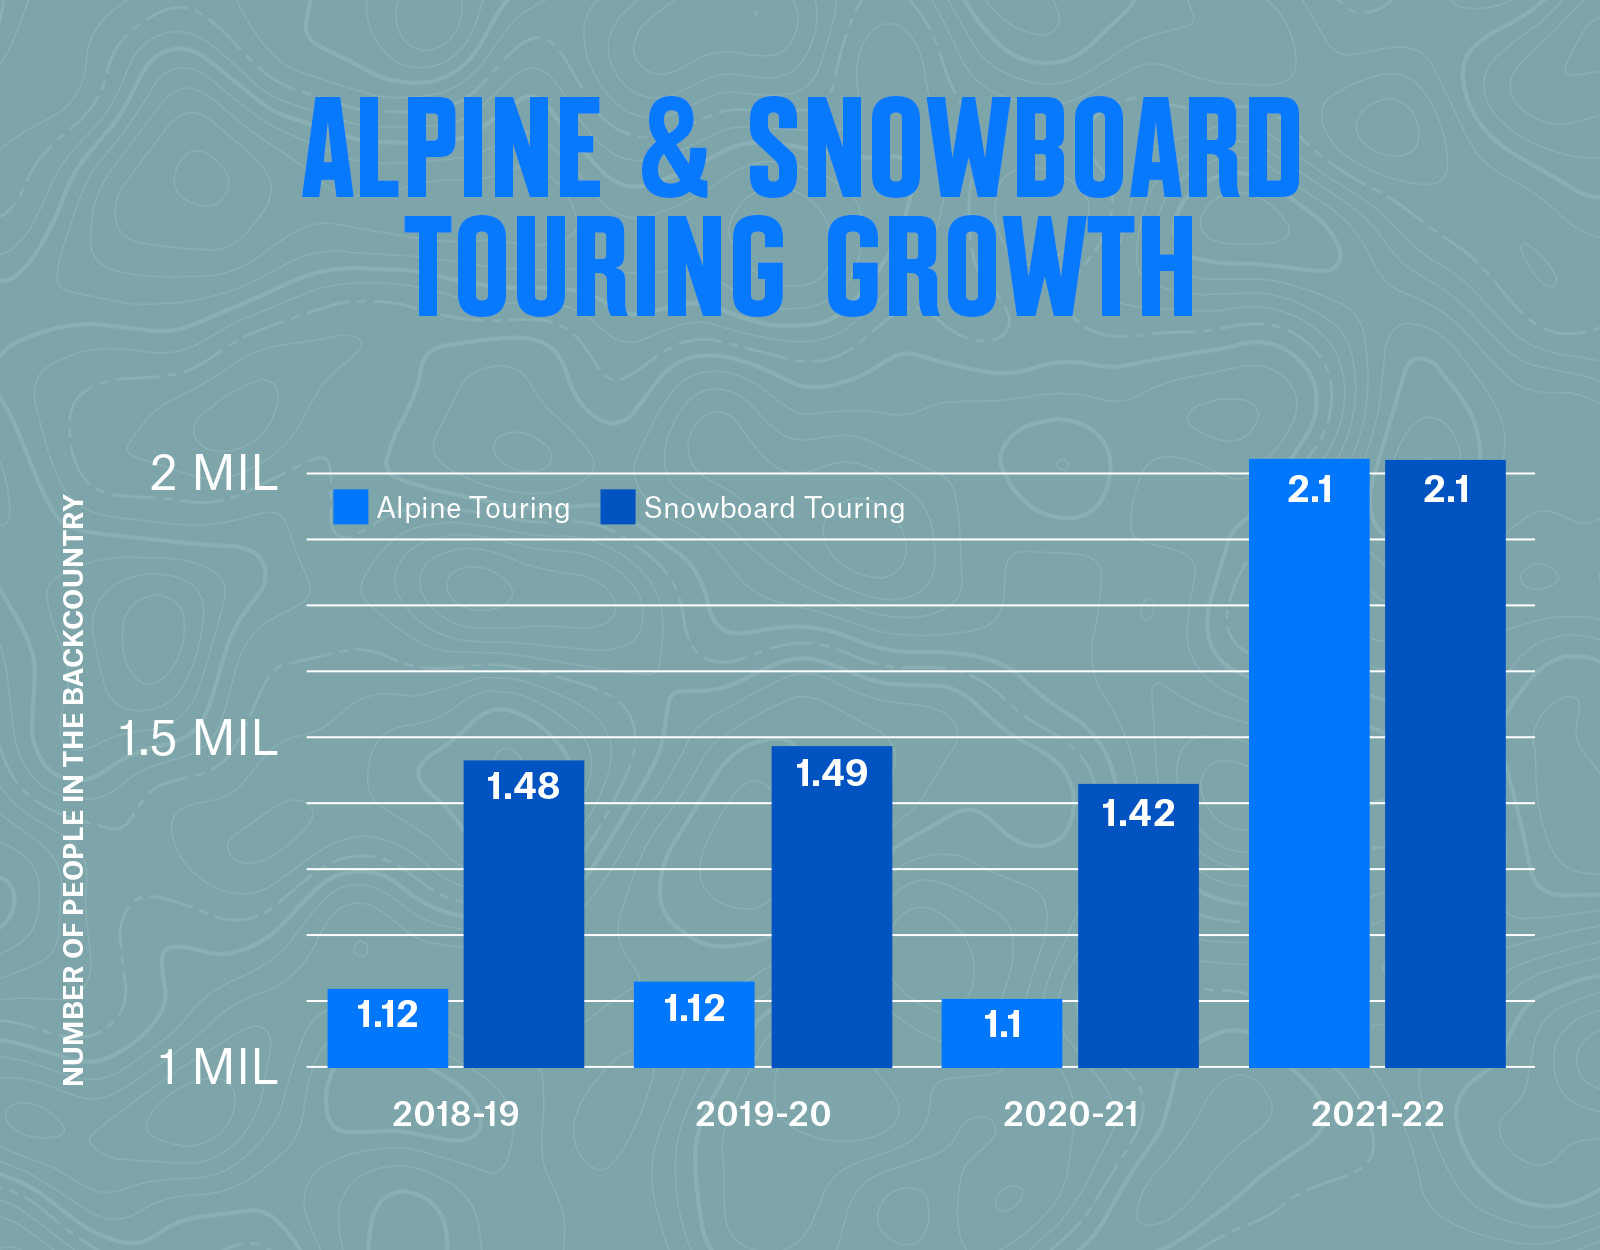 Snowsports Industries Association (SIA) participation report data about the growth of alpine and snowboard touring.